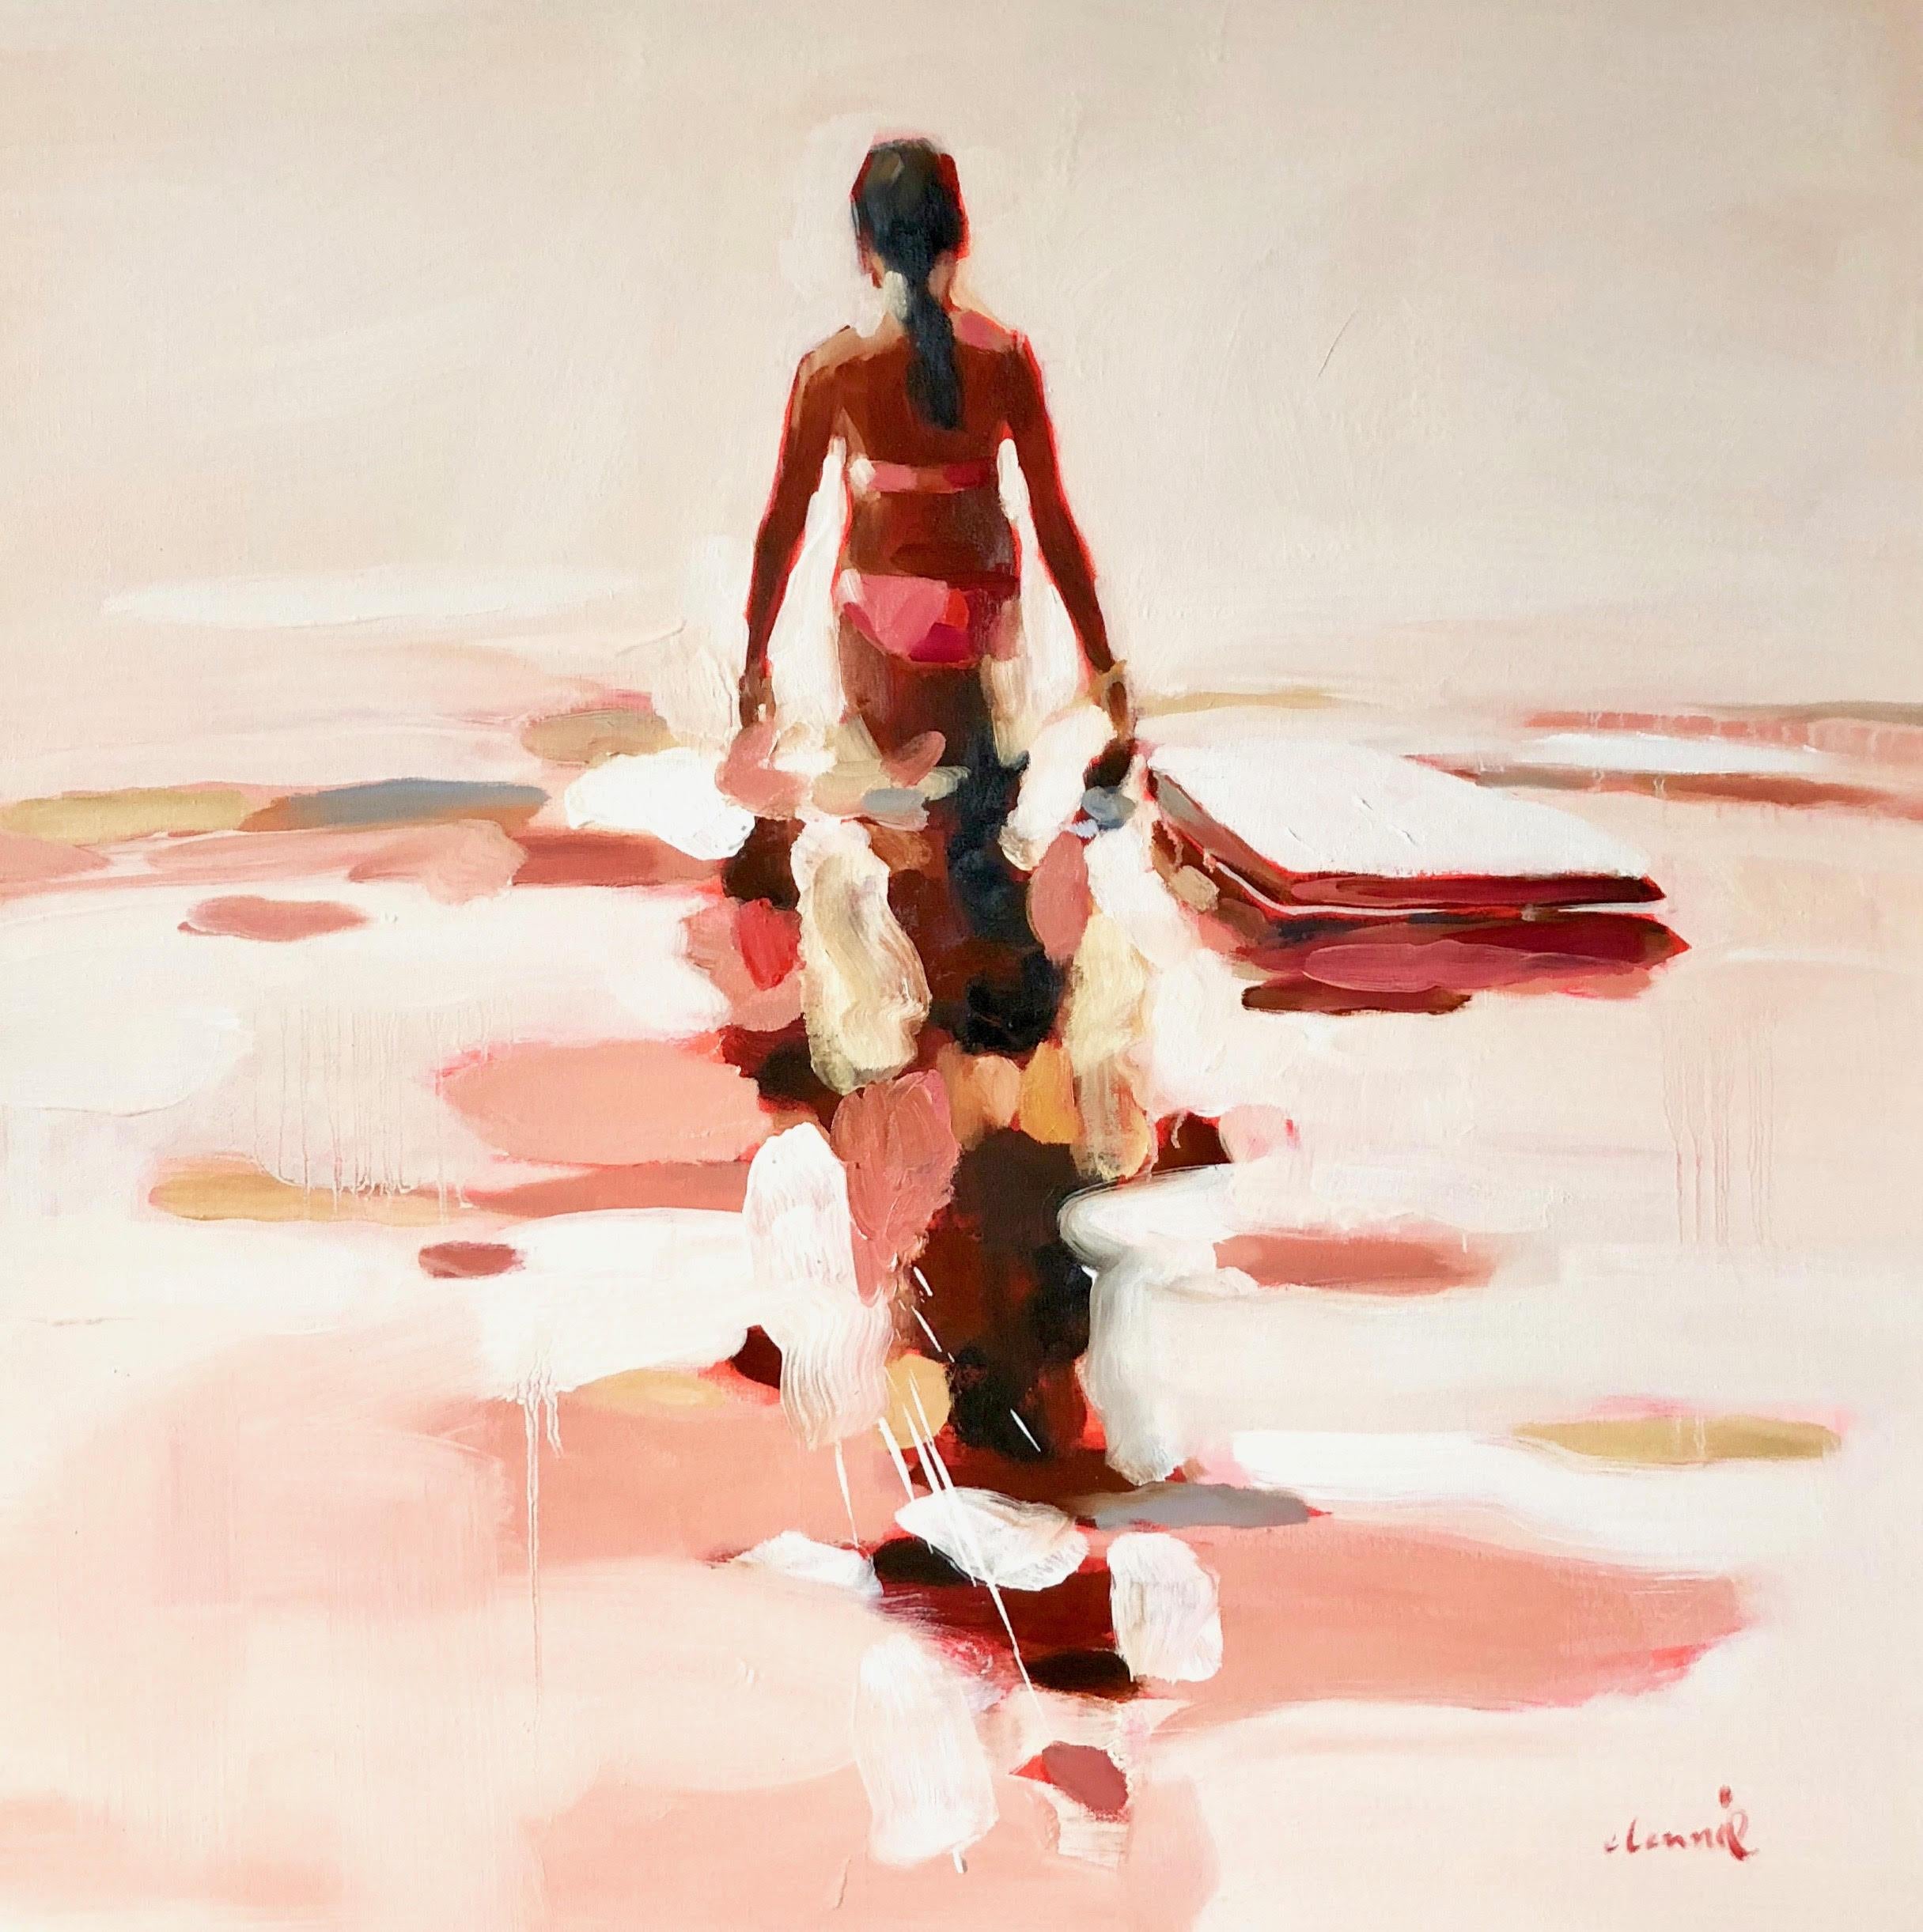 Elizabeth Lennie Figurative Painting - "Independence" Abstract oil painting of a woman wading in the water